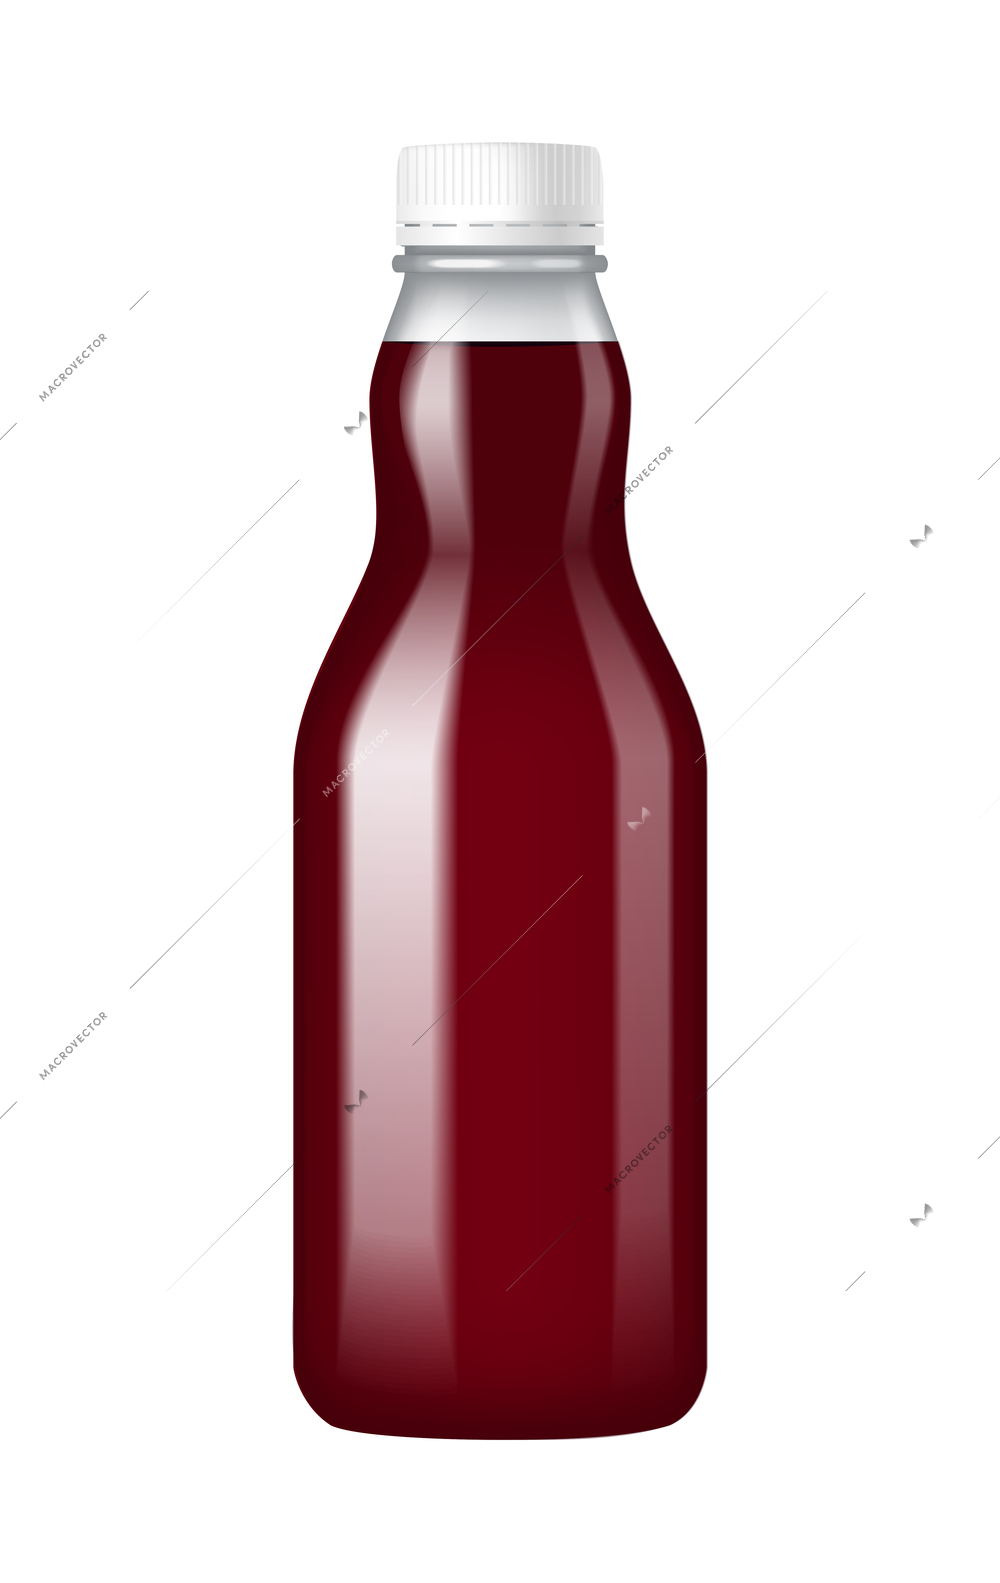 Realistic bottle of berry juice on white background vector illustration